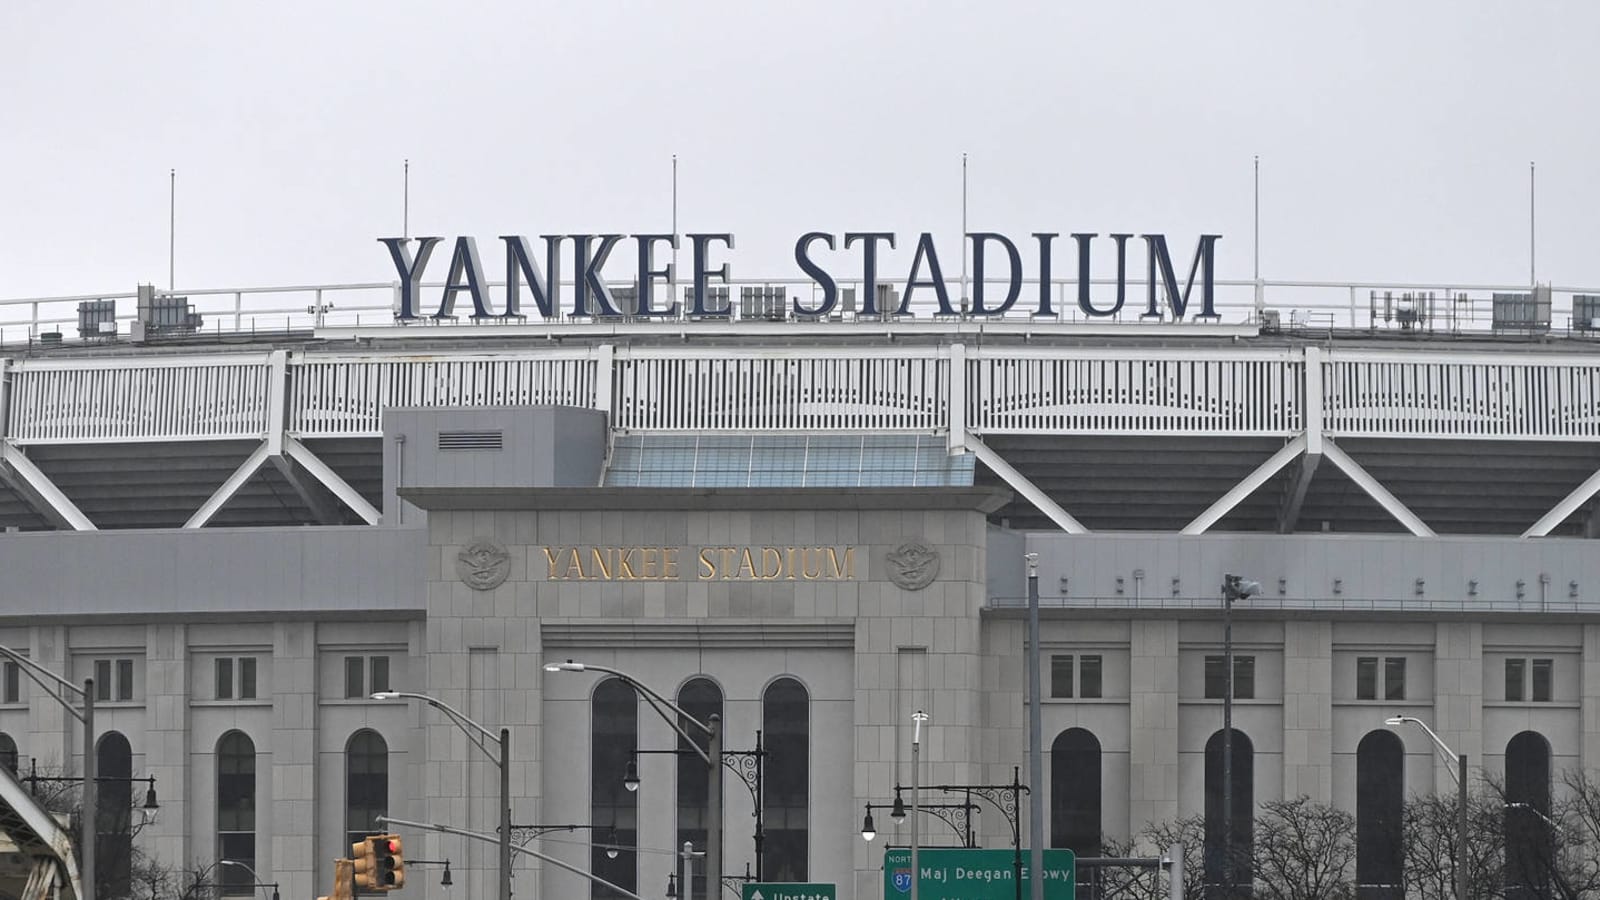 Yankee Stadium becomes COVID-19 vaccination site